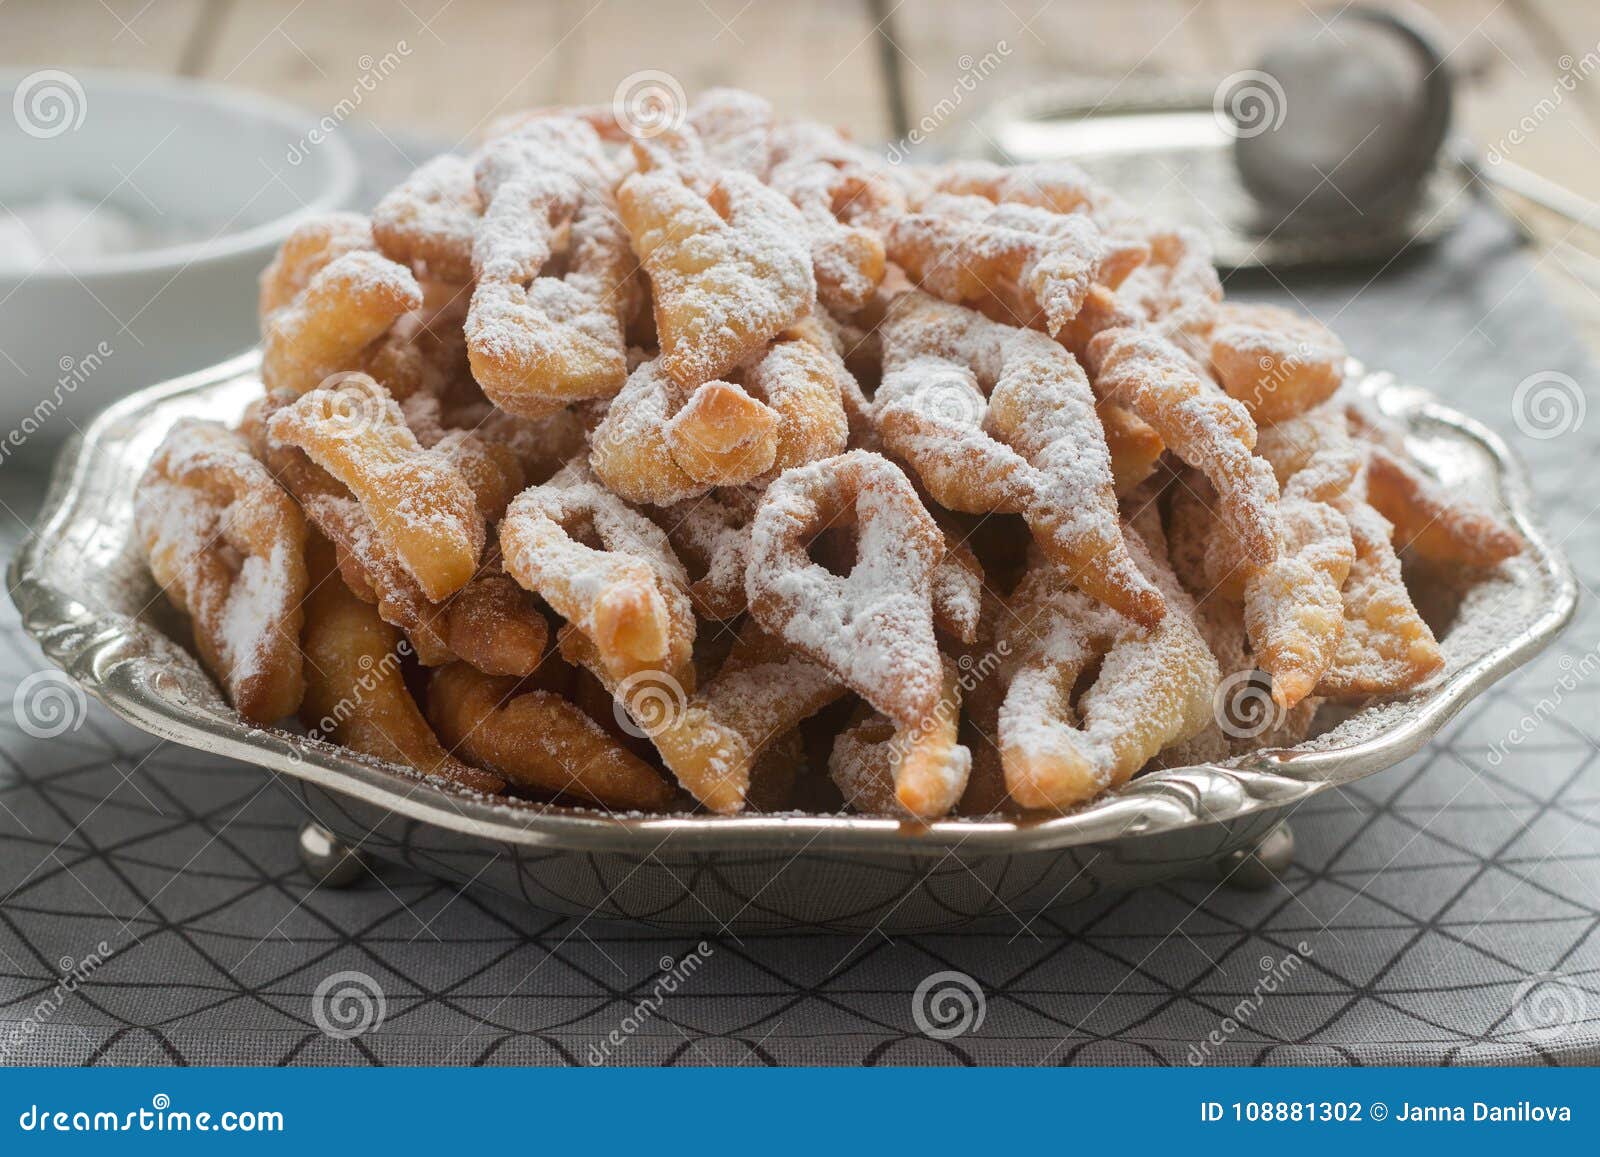 angel wings biscuits, a traditional european sweet dish for carnival. rustic style.